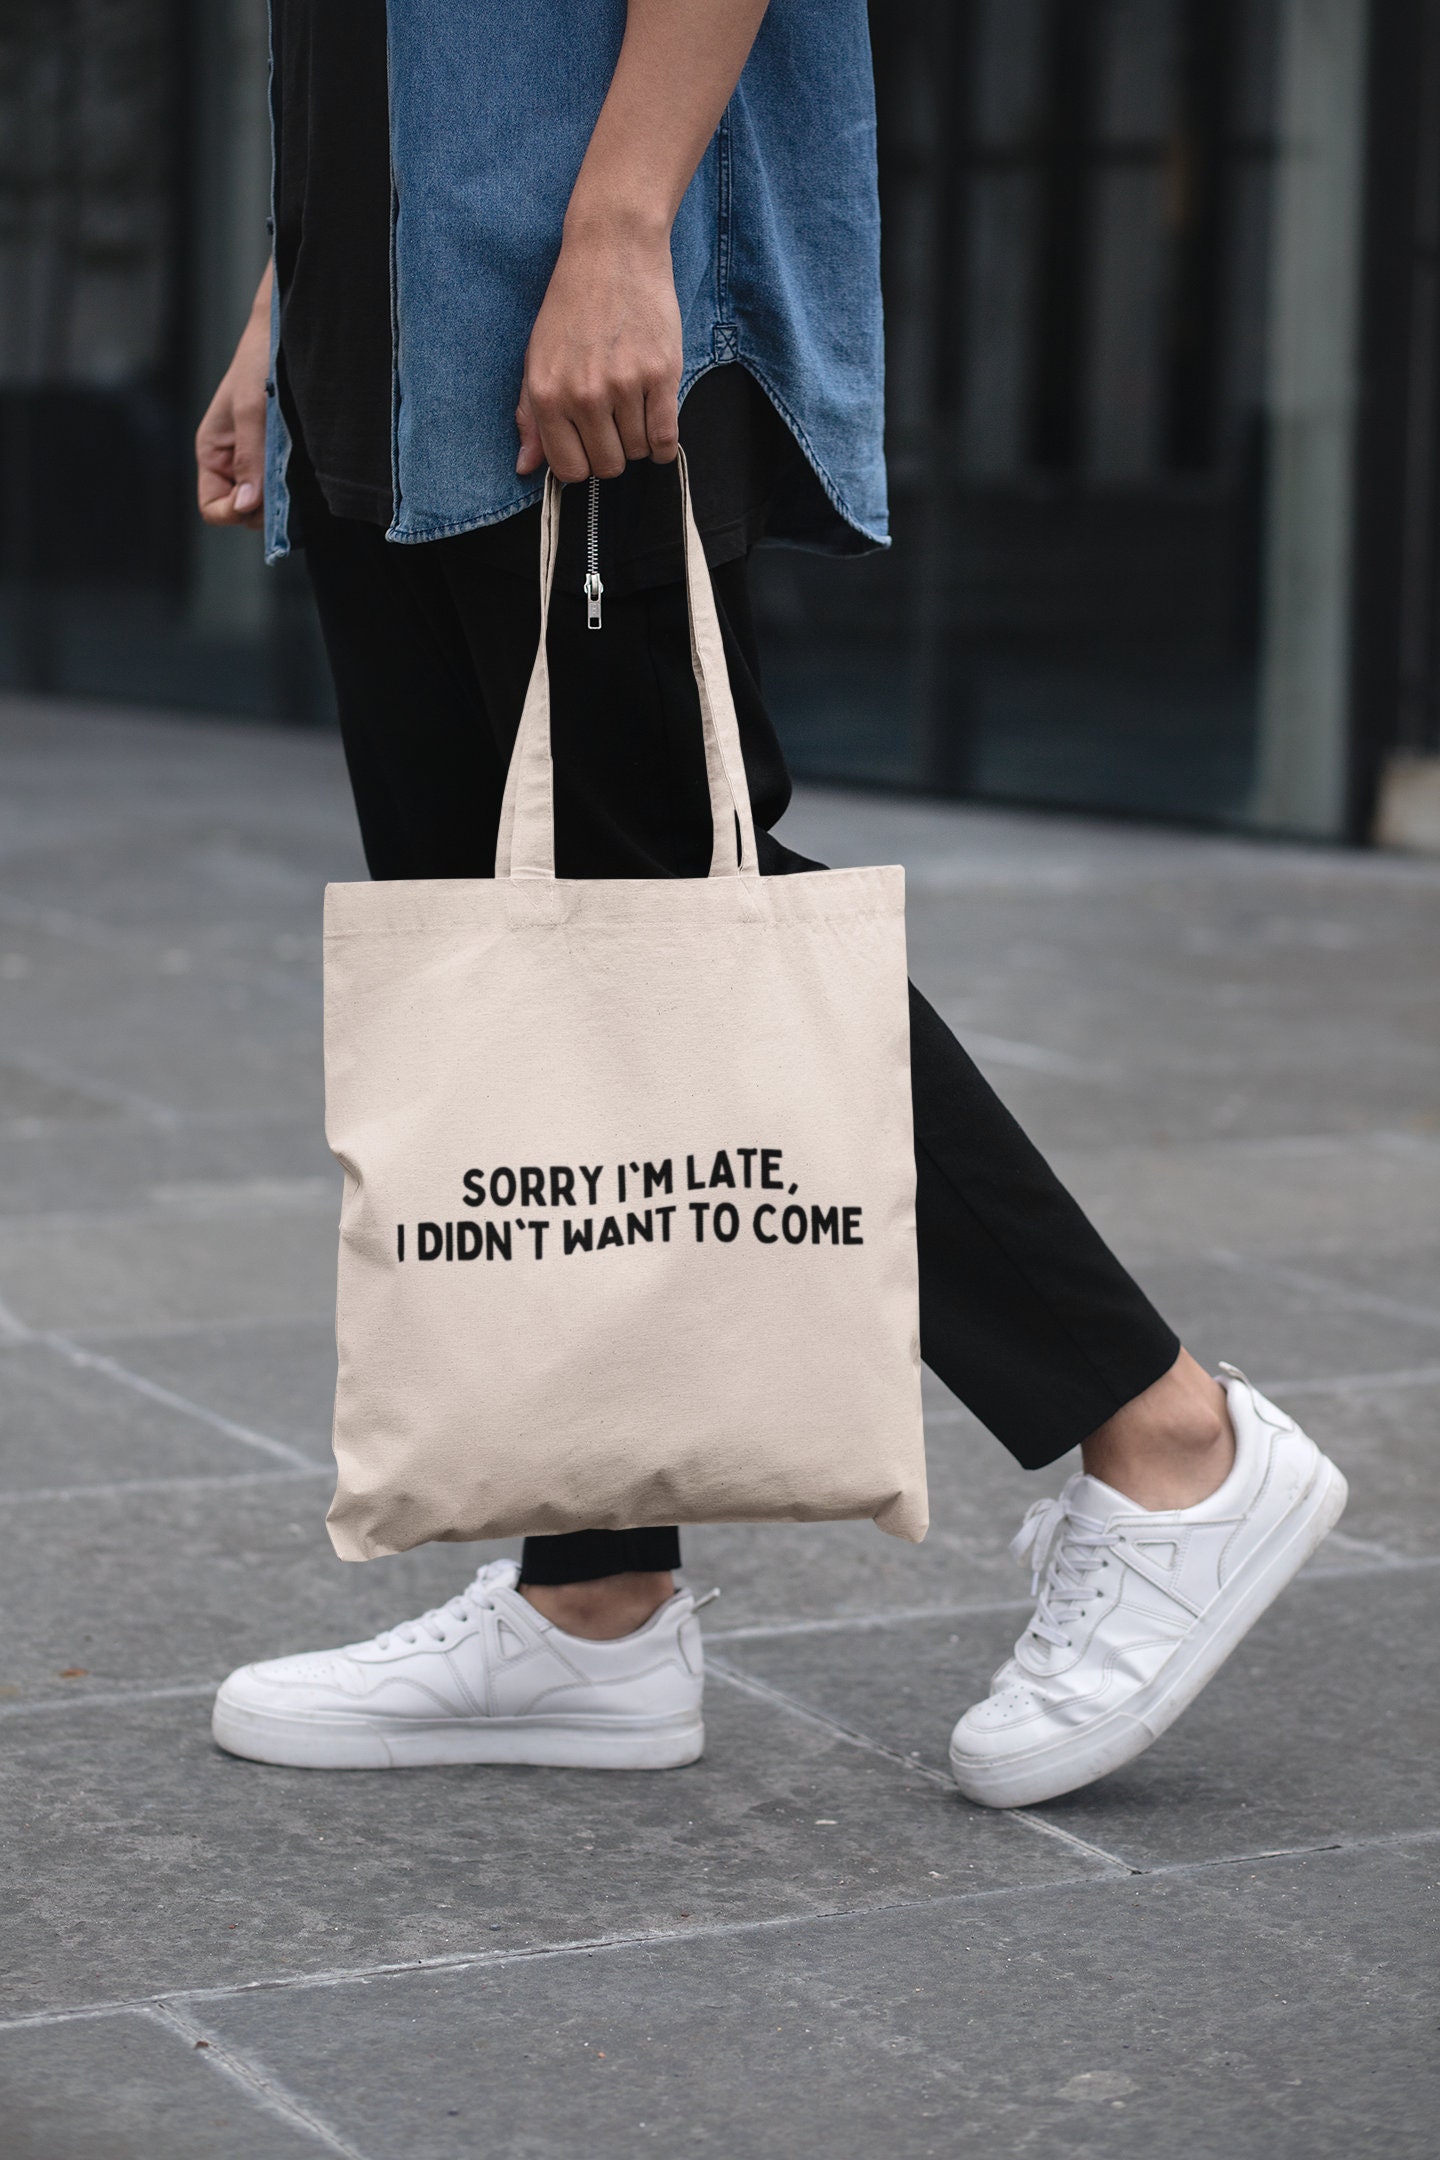 Sorry I'm Late Tote Bag Funny Tote Bag Tote in the Uk - Etsy UK